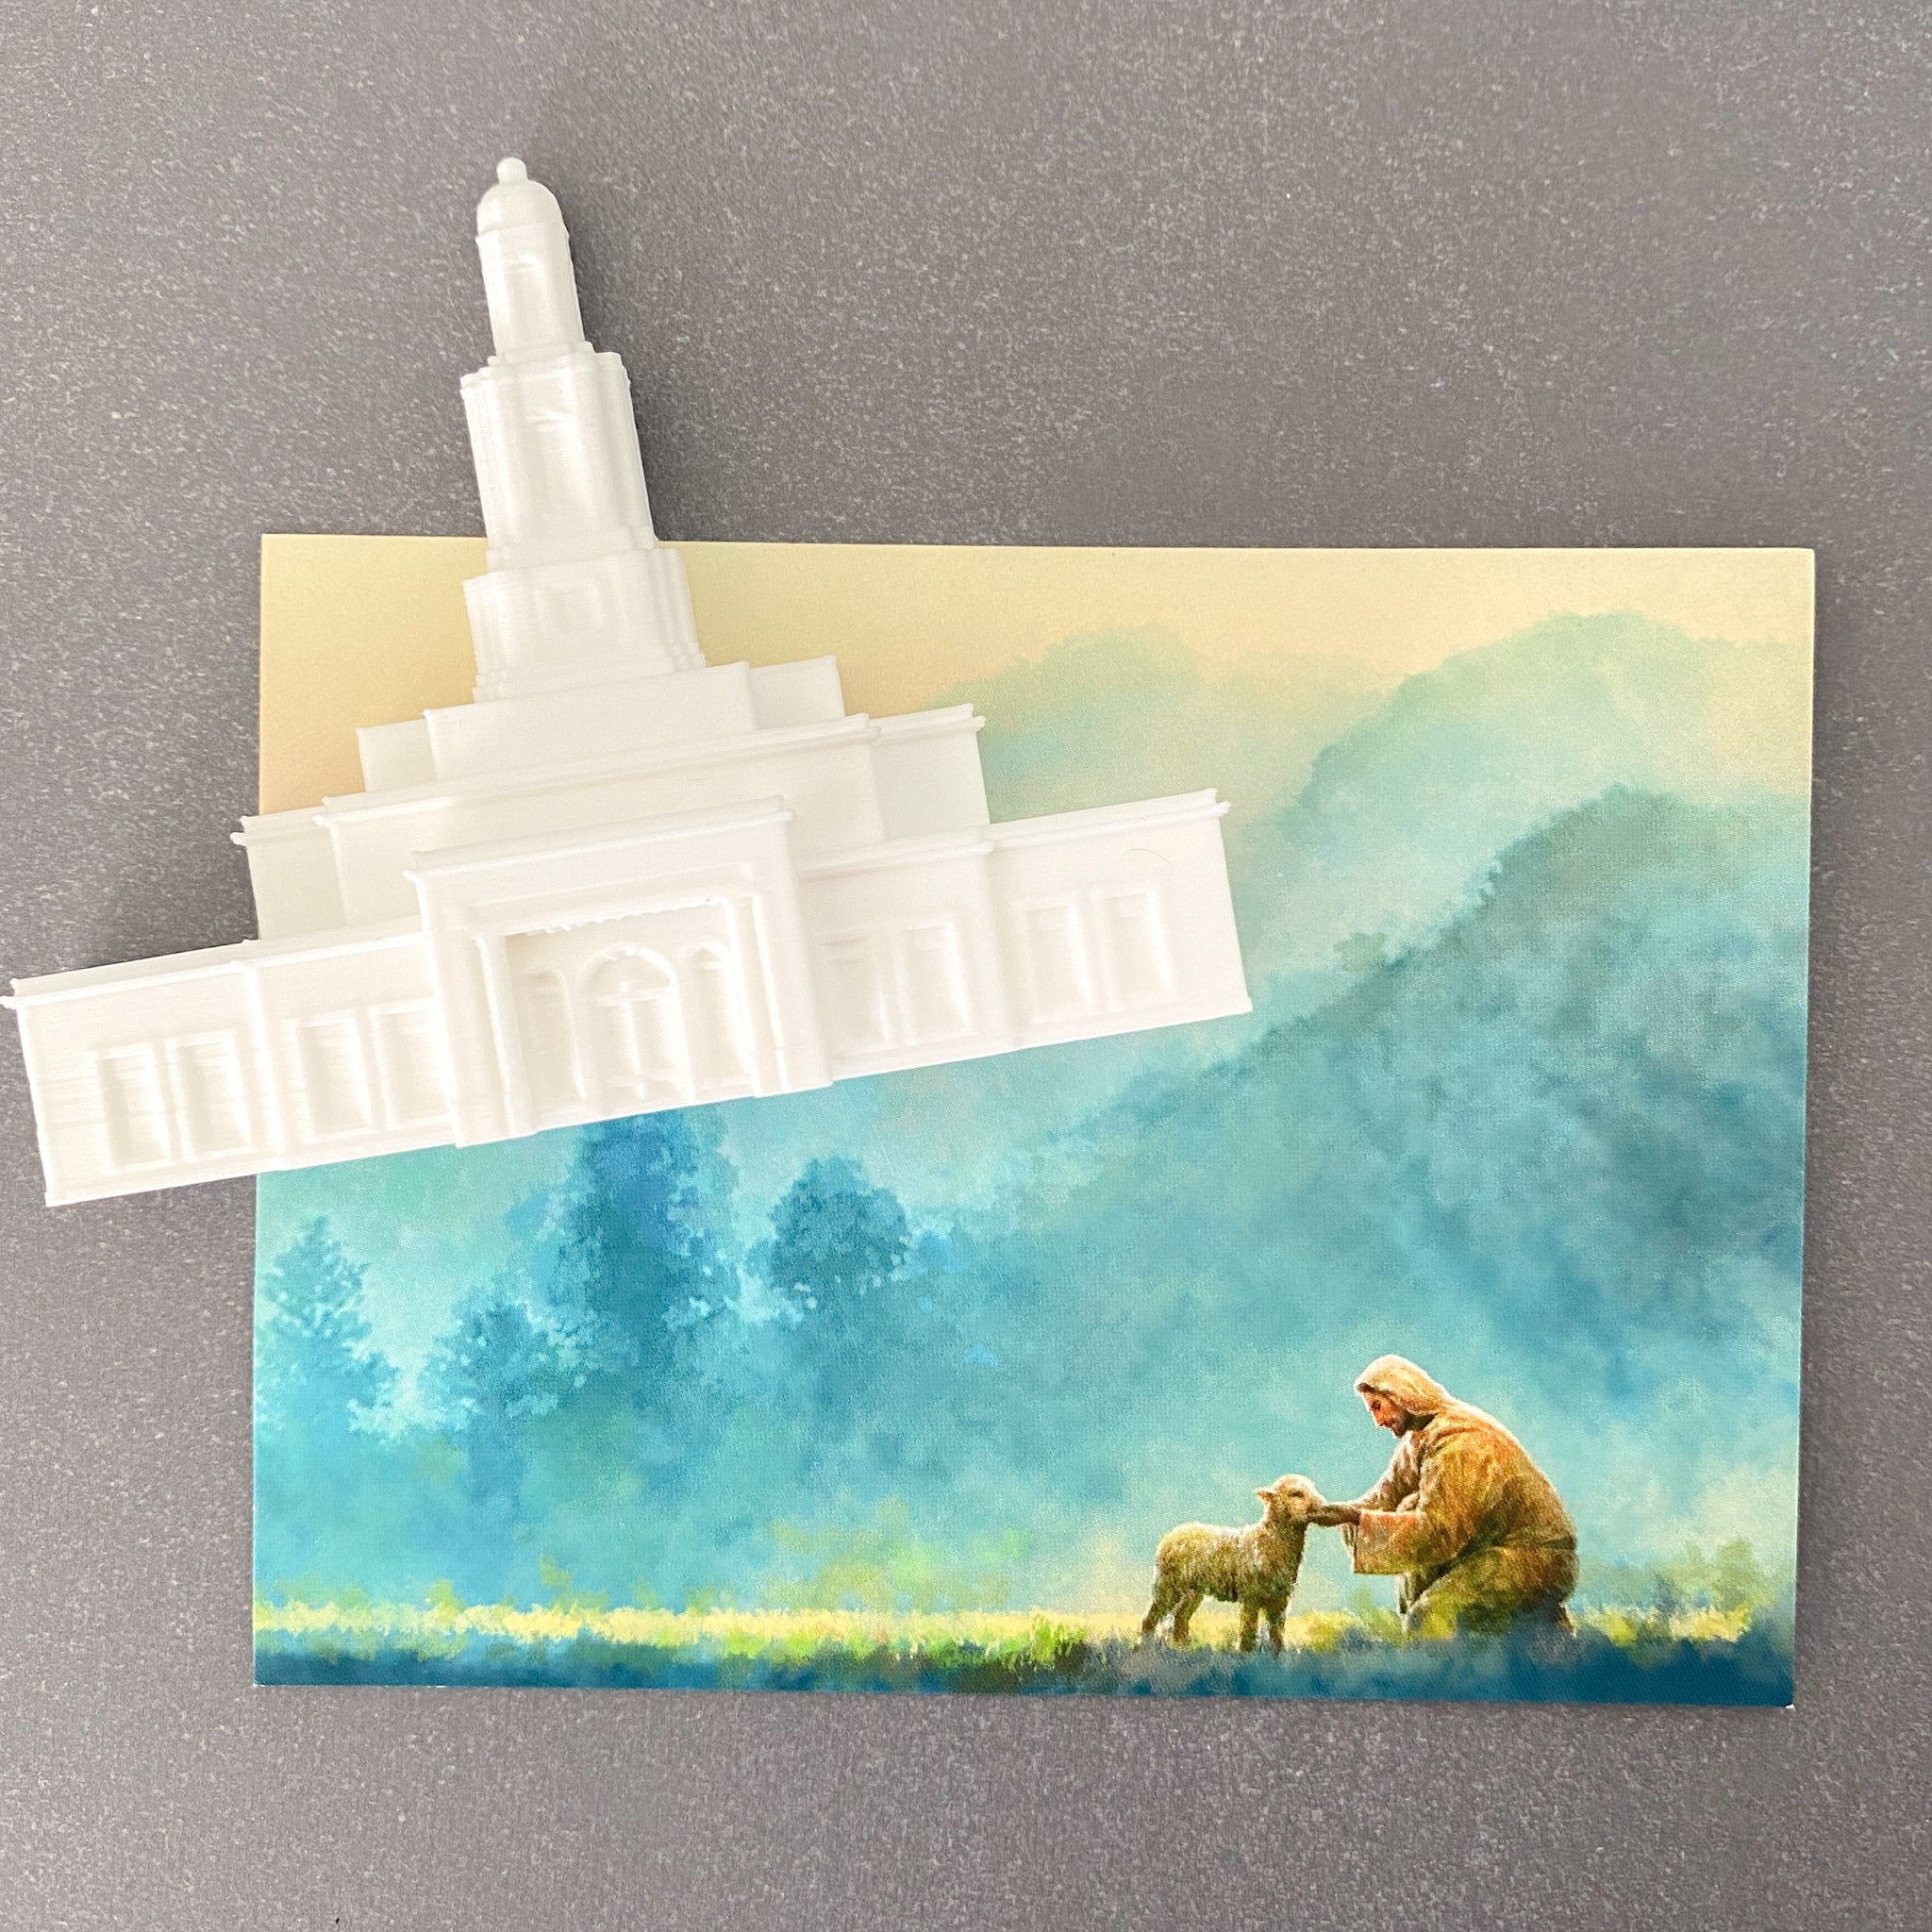 Tallahassee Florida Temple Magnet